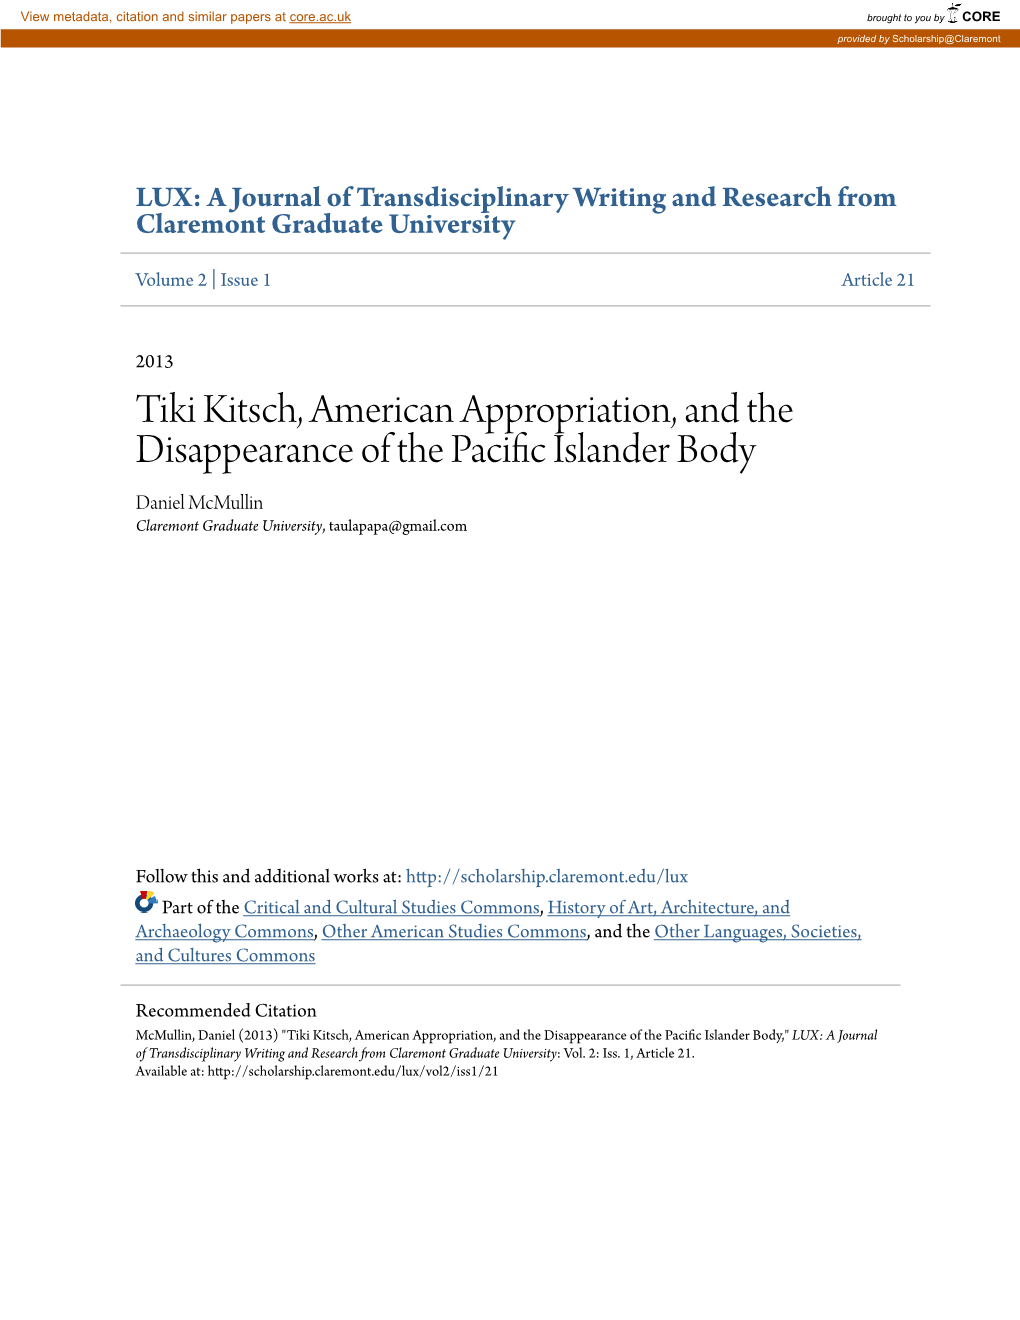 Tiki Kitsch, American Appropriation, and the Disappearance of the Pacific Sli Ander Body Daniel Mcmullin Claremont Graduate University, Taulapapa@Gmail.Com